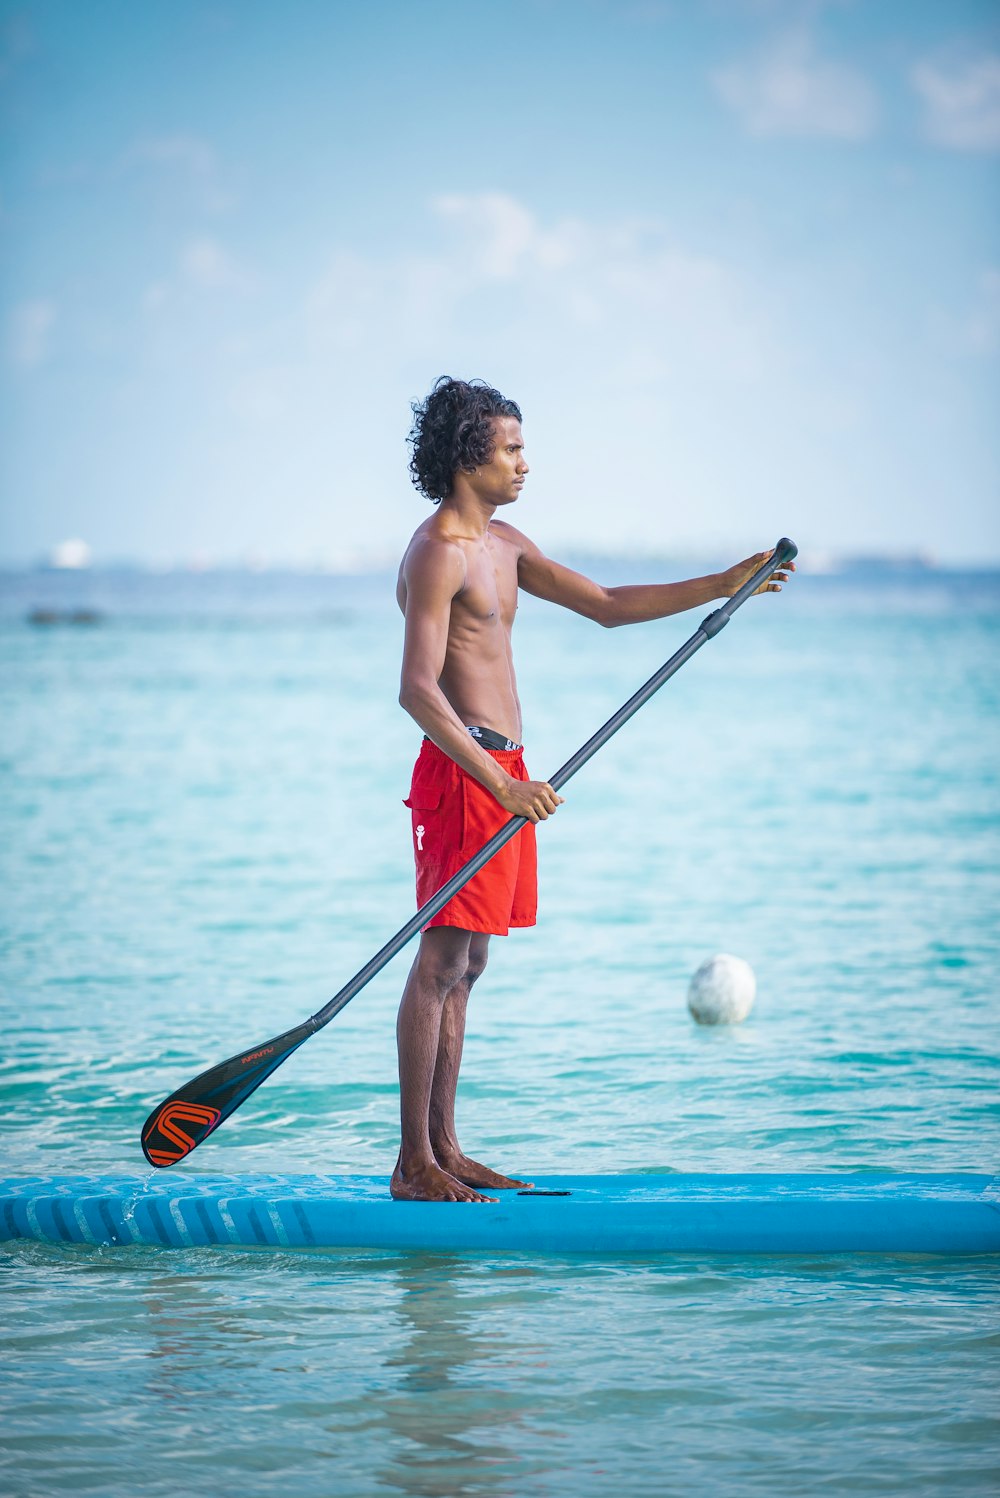 man in red shorts holding red paddle while standing on blue body of water during daytime